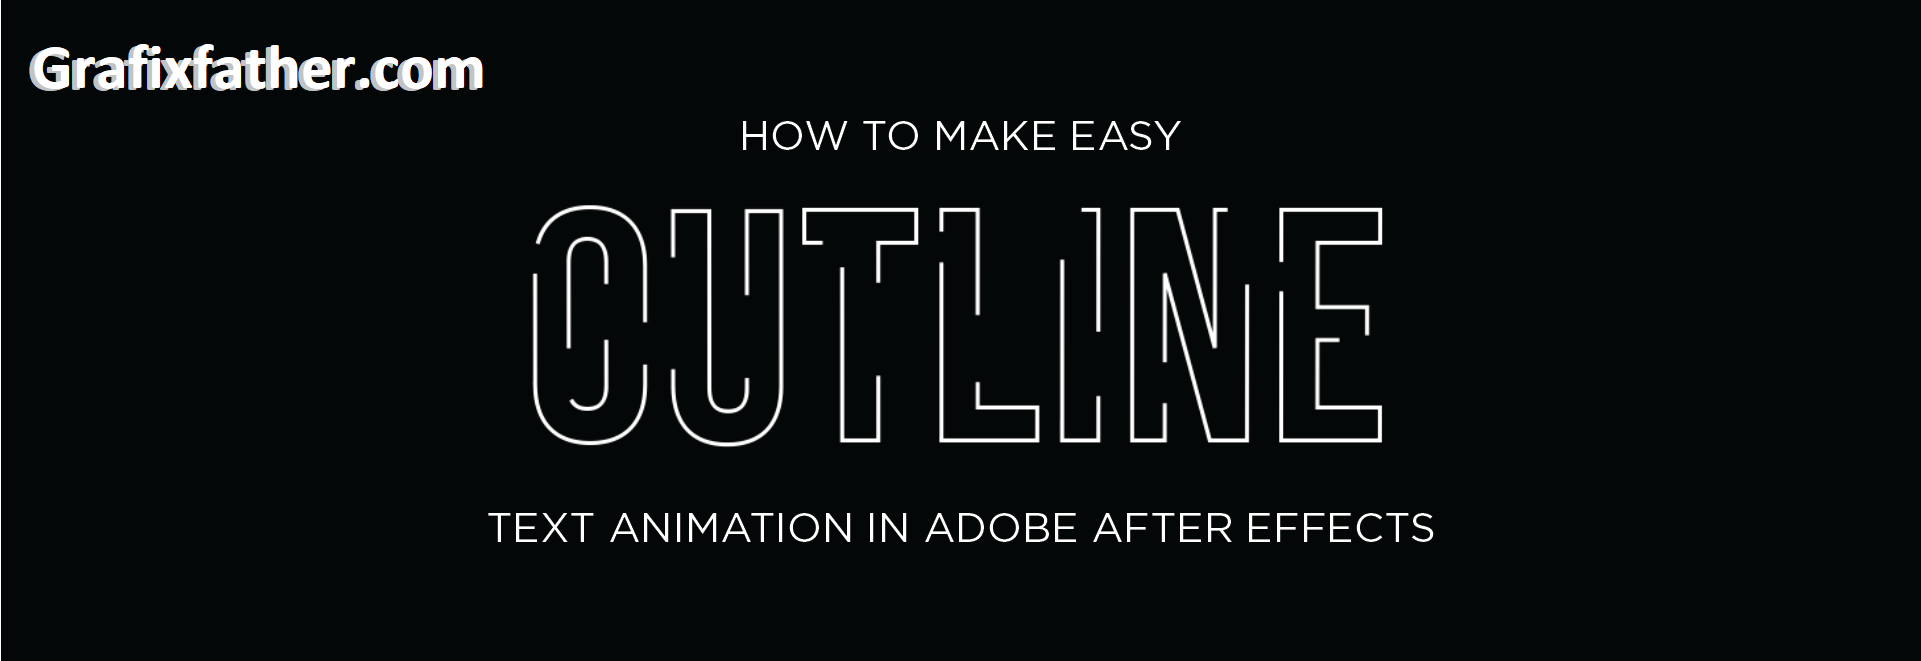 after effects animation download